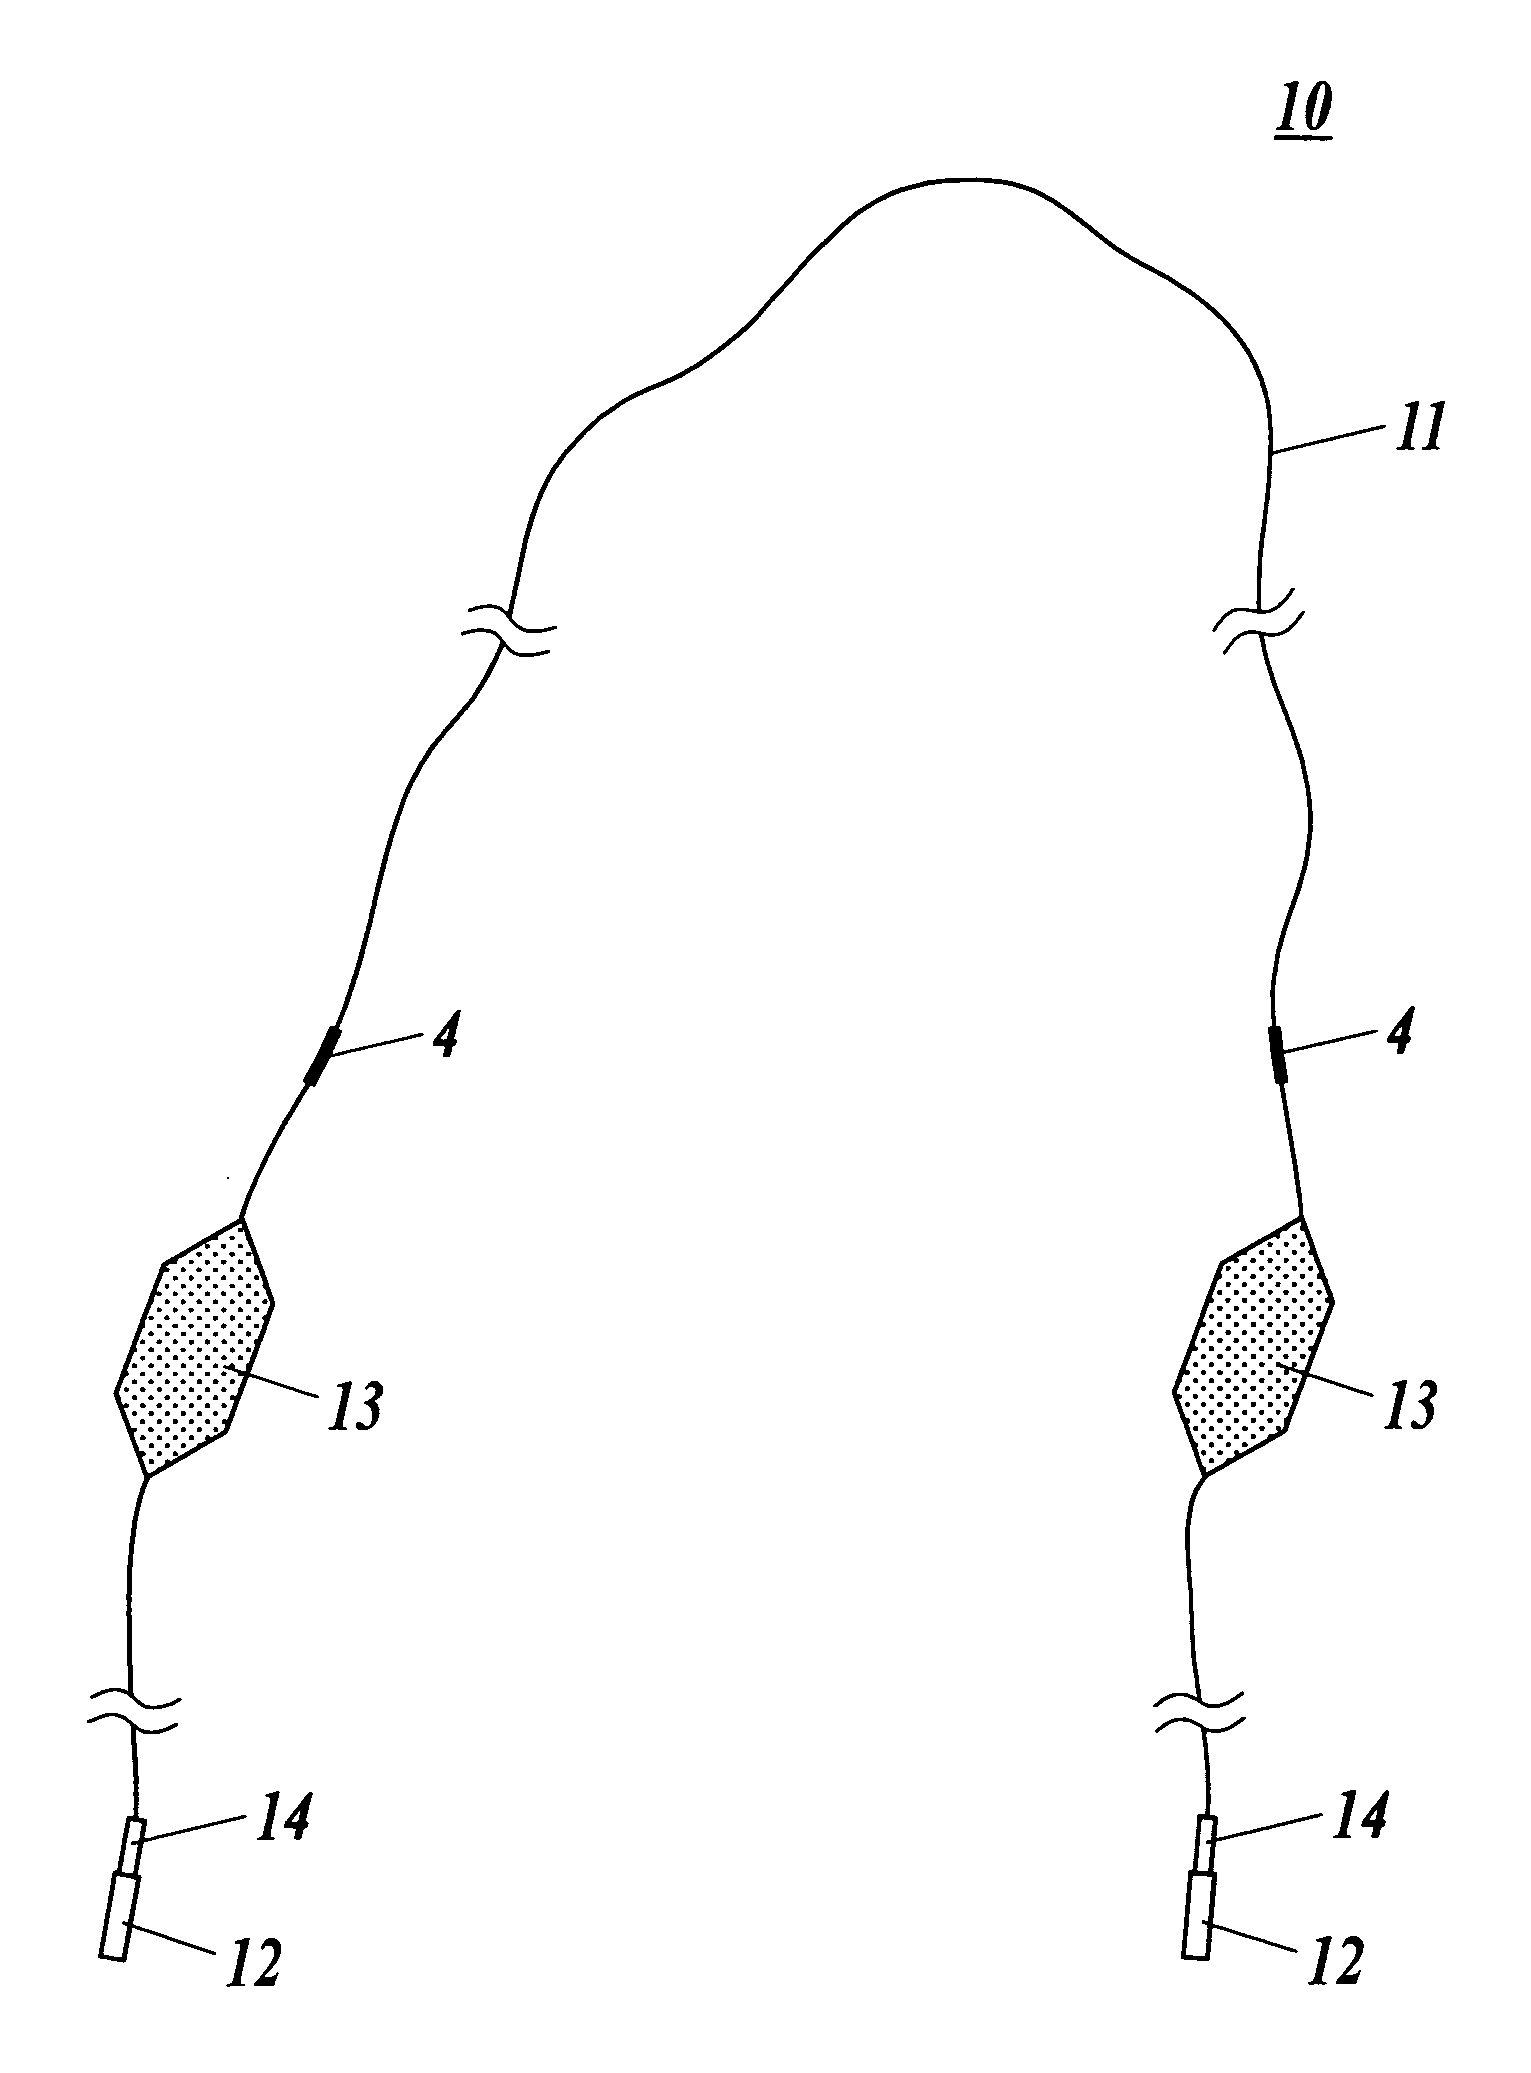 Modular sensor for damage detection, manufacturing method, and structural composite material